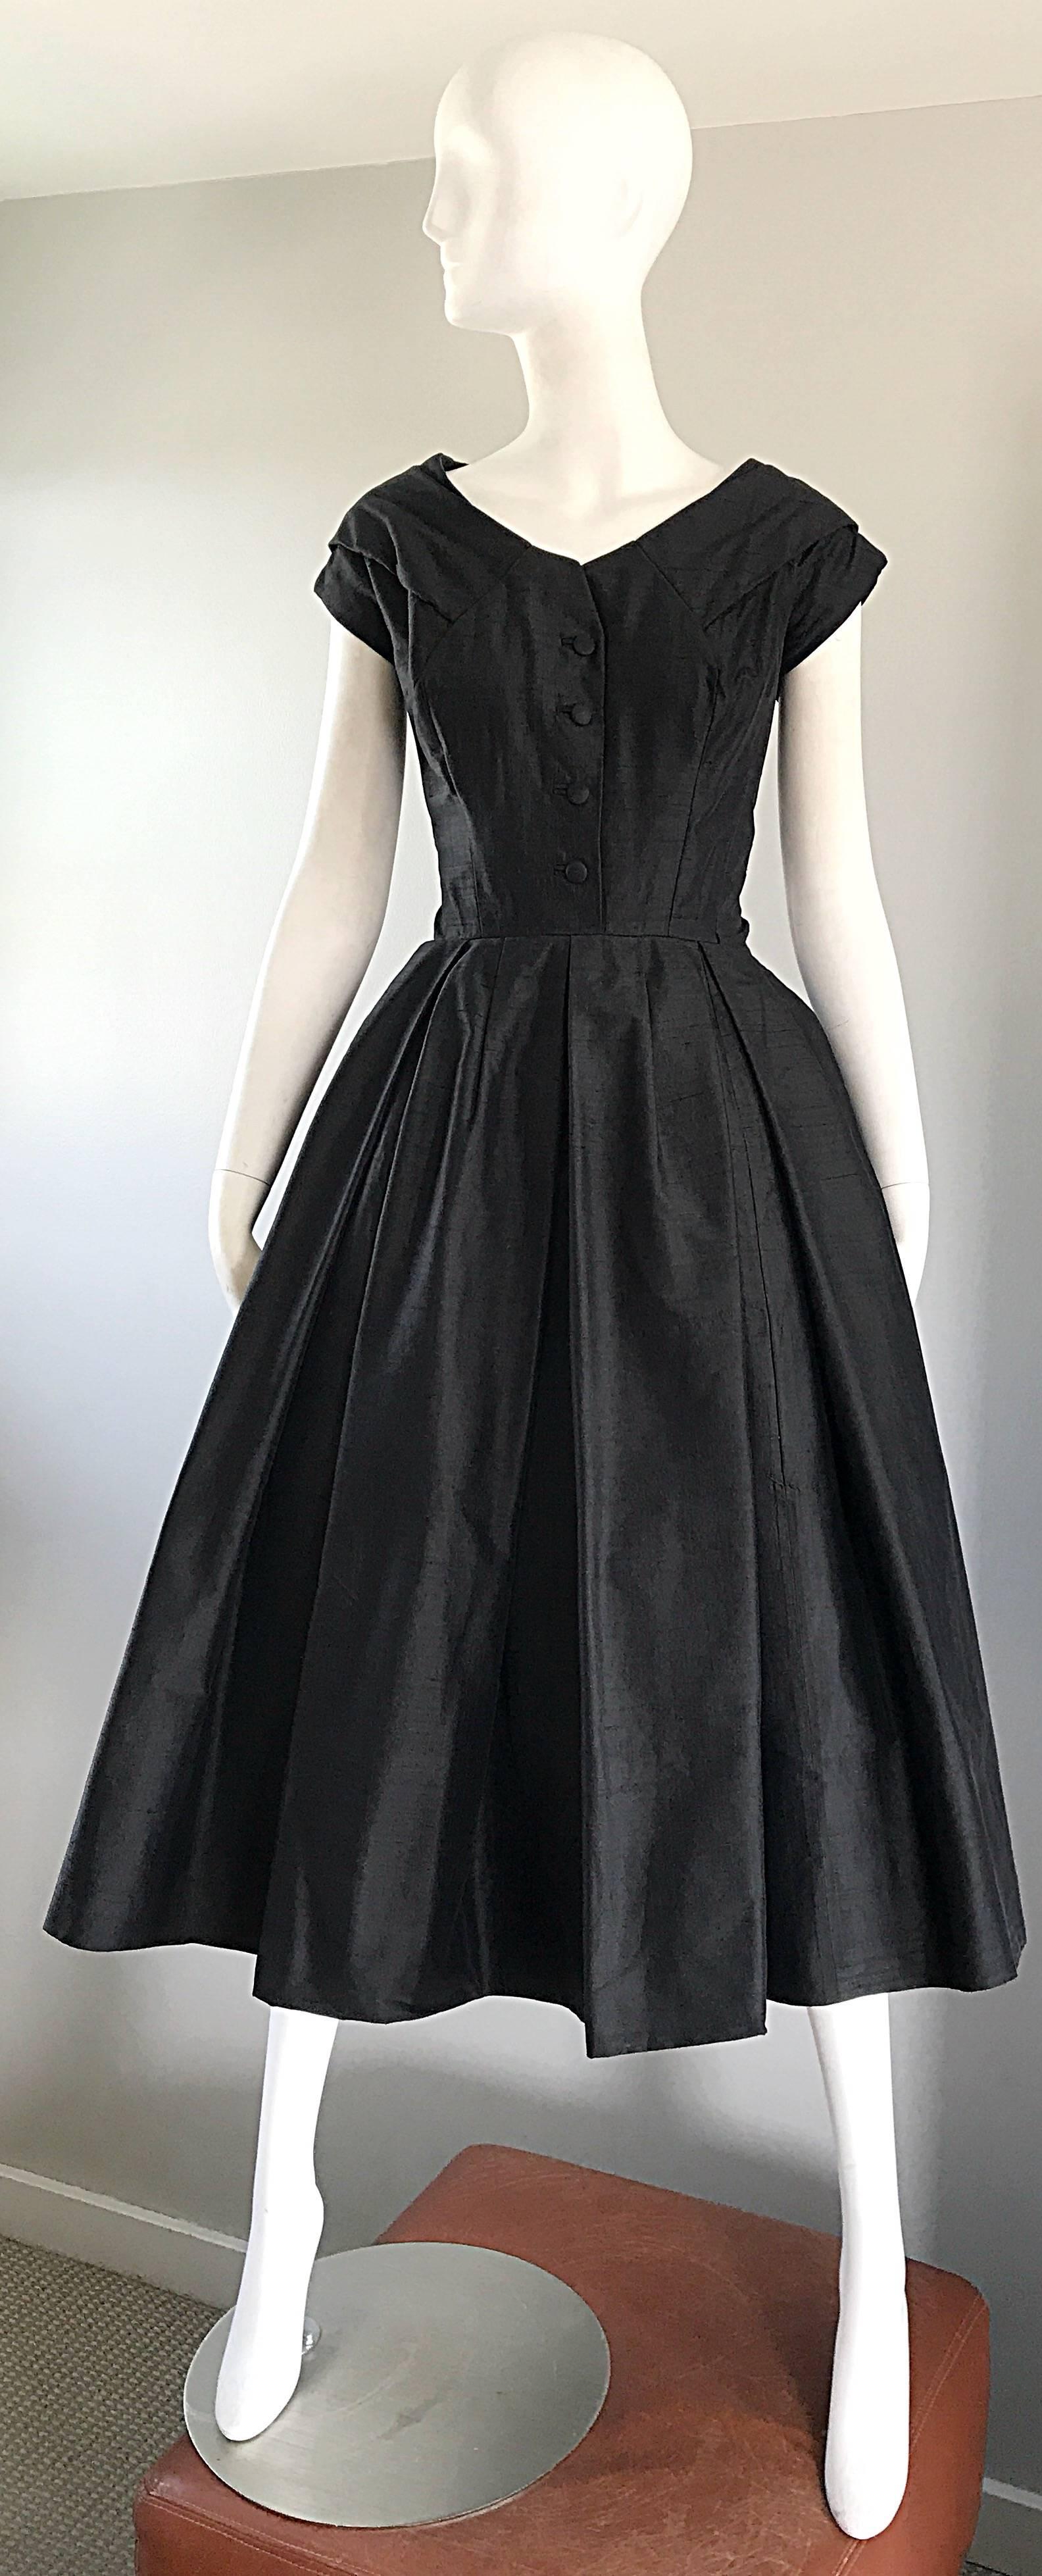 Rare 50s CHRISTIAN DIOR Haute Couture numbered "New Look" black silk shantung dress! Features a well tailored fitted bodice, with an incredible full skirt. Full metal zipper up the back with hook-and-eye closures. Built in interior support